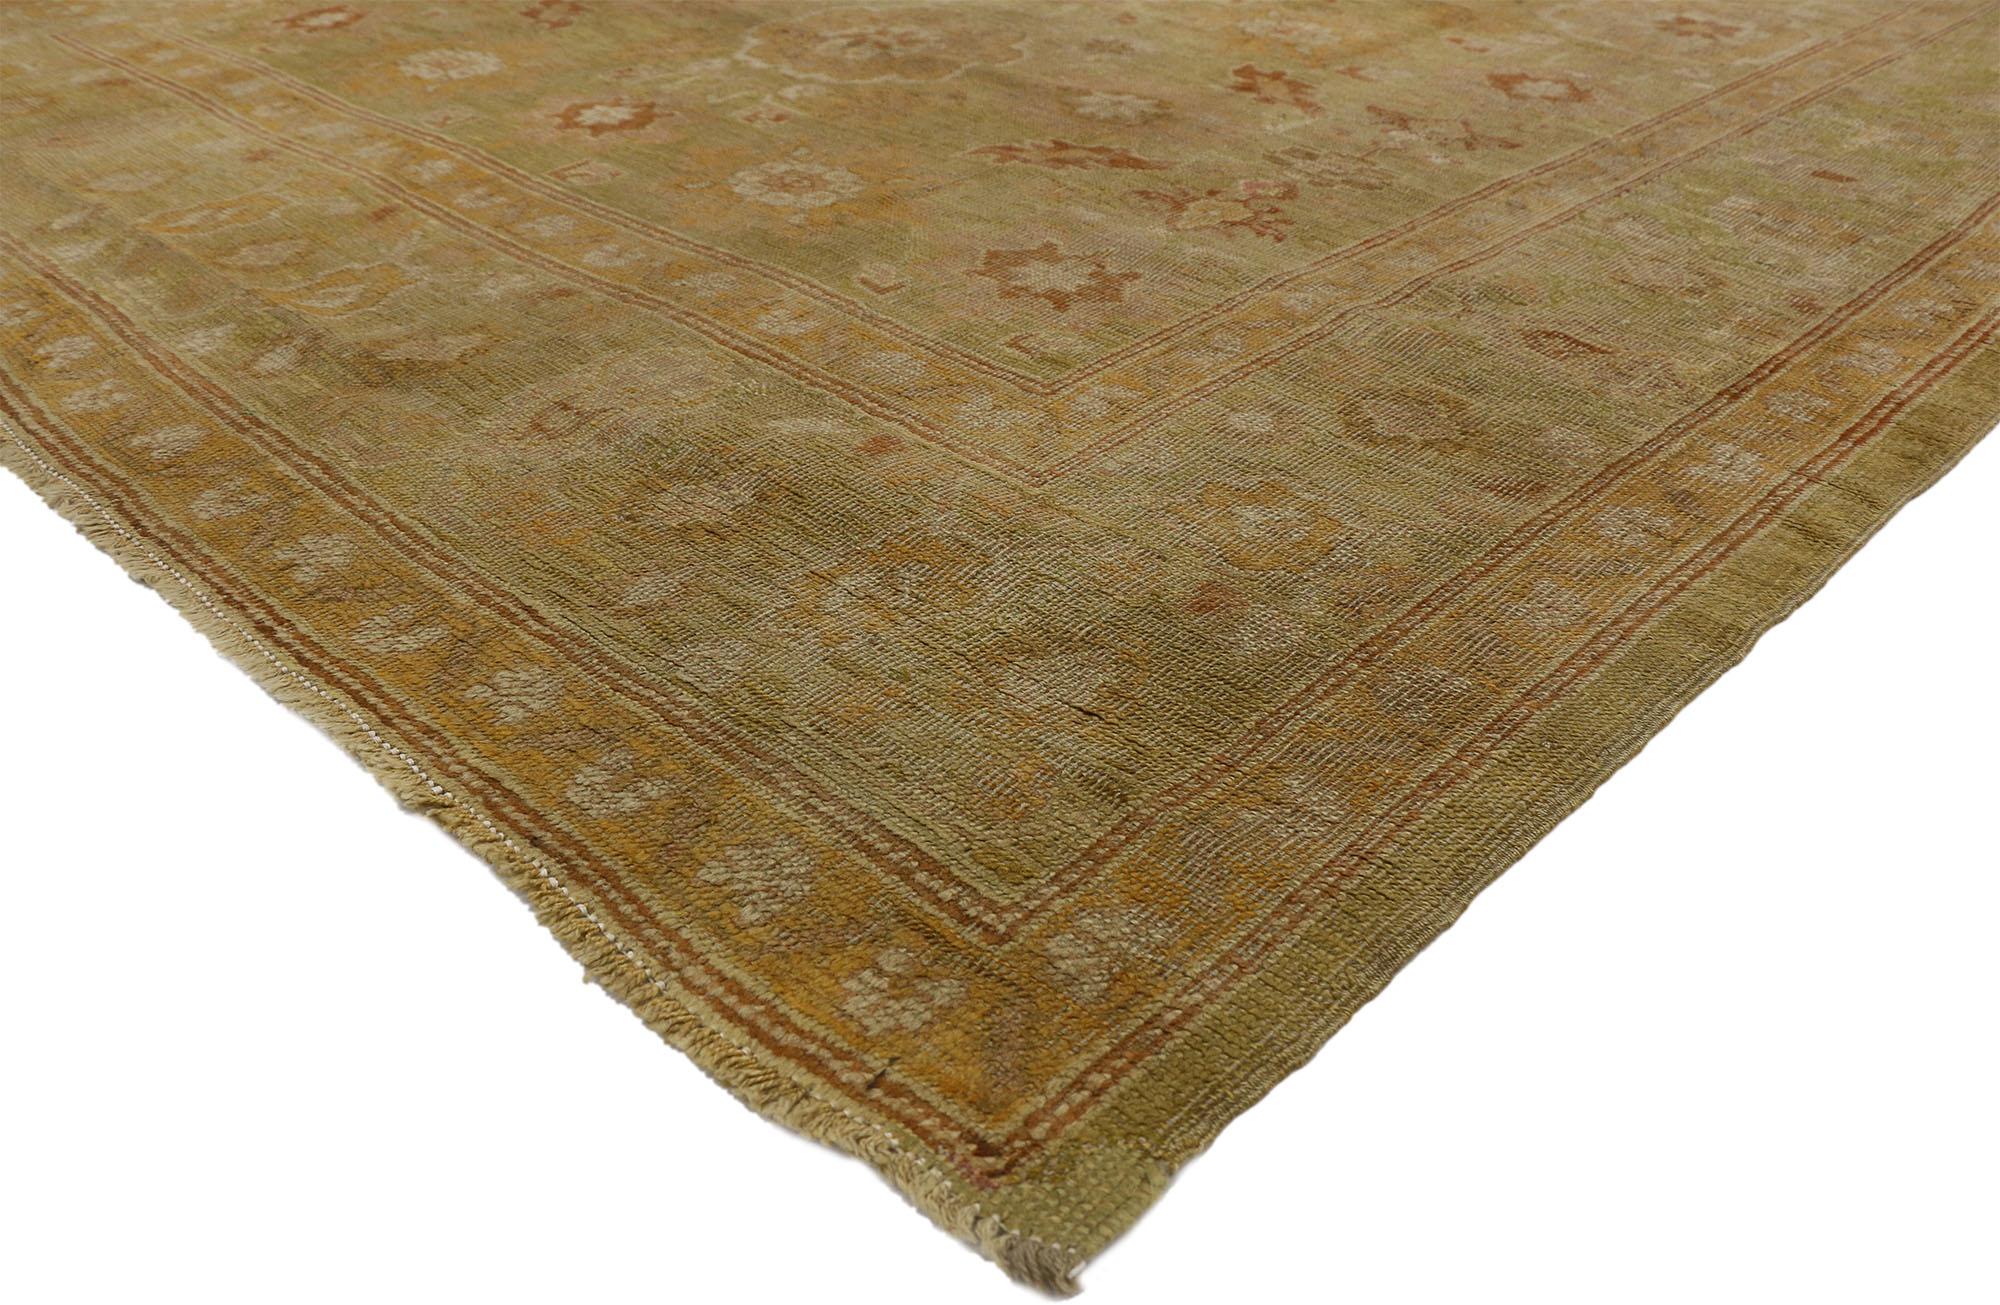 73138 late 19th-century antique Turkish oushak rug with English Cottage style. Balancing a timeless design with traditional sensibility, this hand-knotted antique Turkish Oushak rug beautifully embodies English Cottage style. The abrashed field is